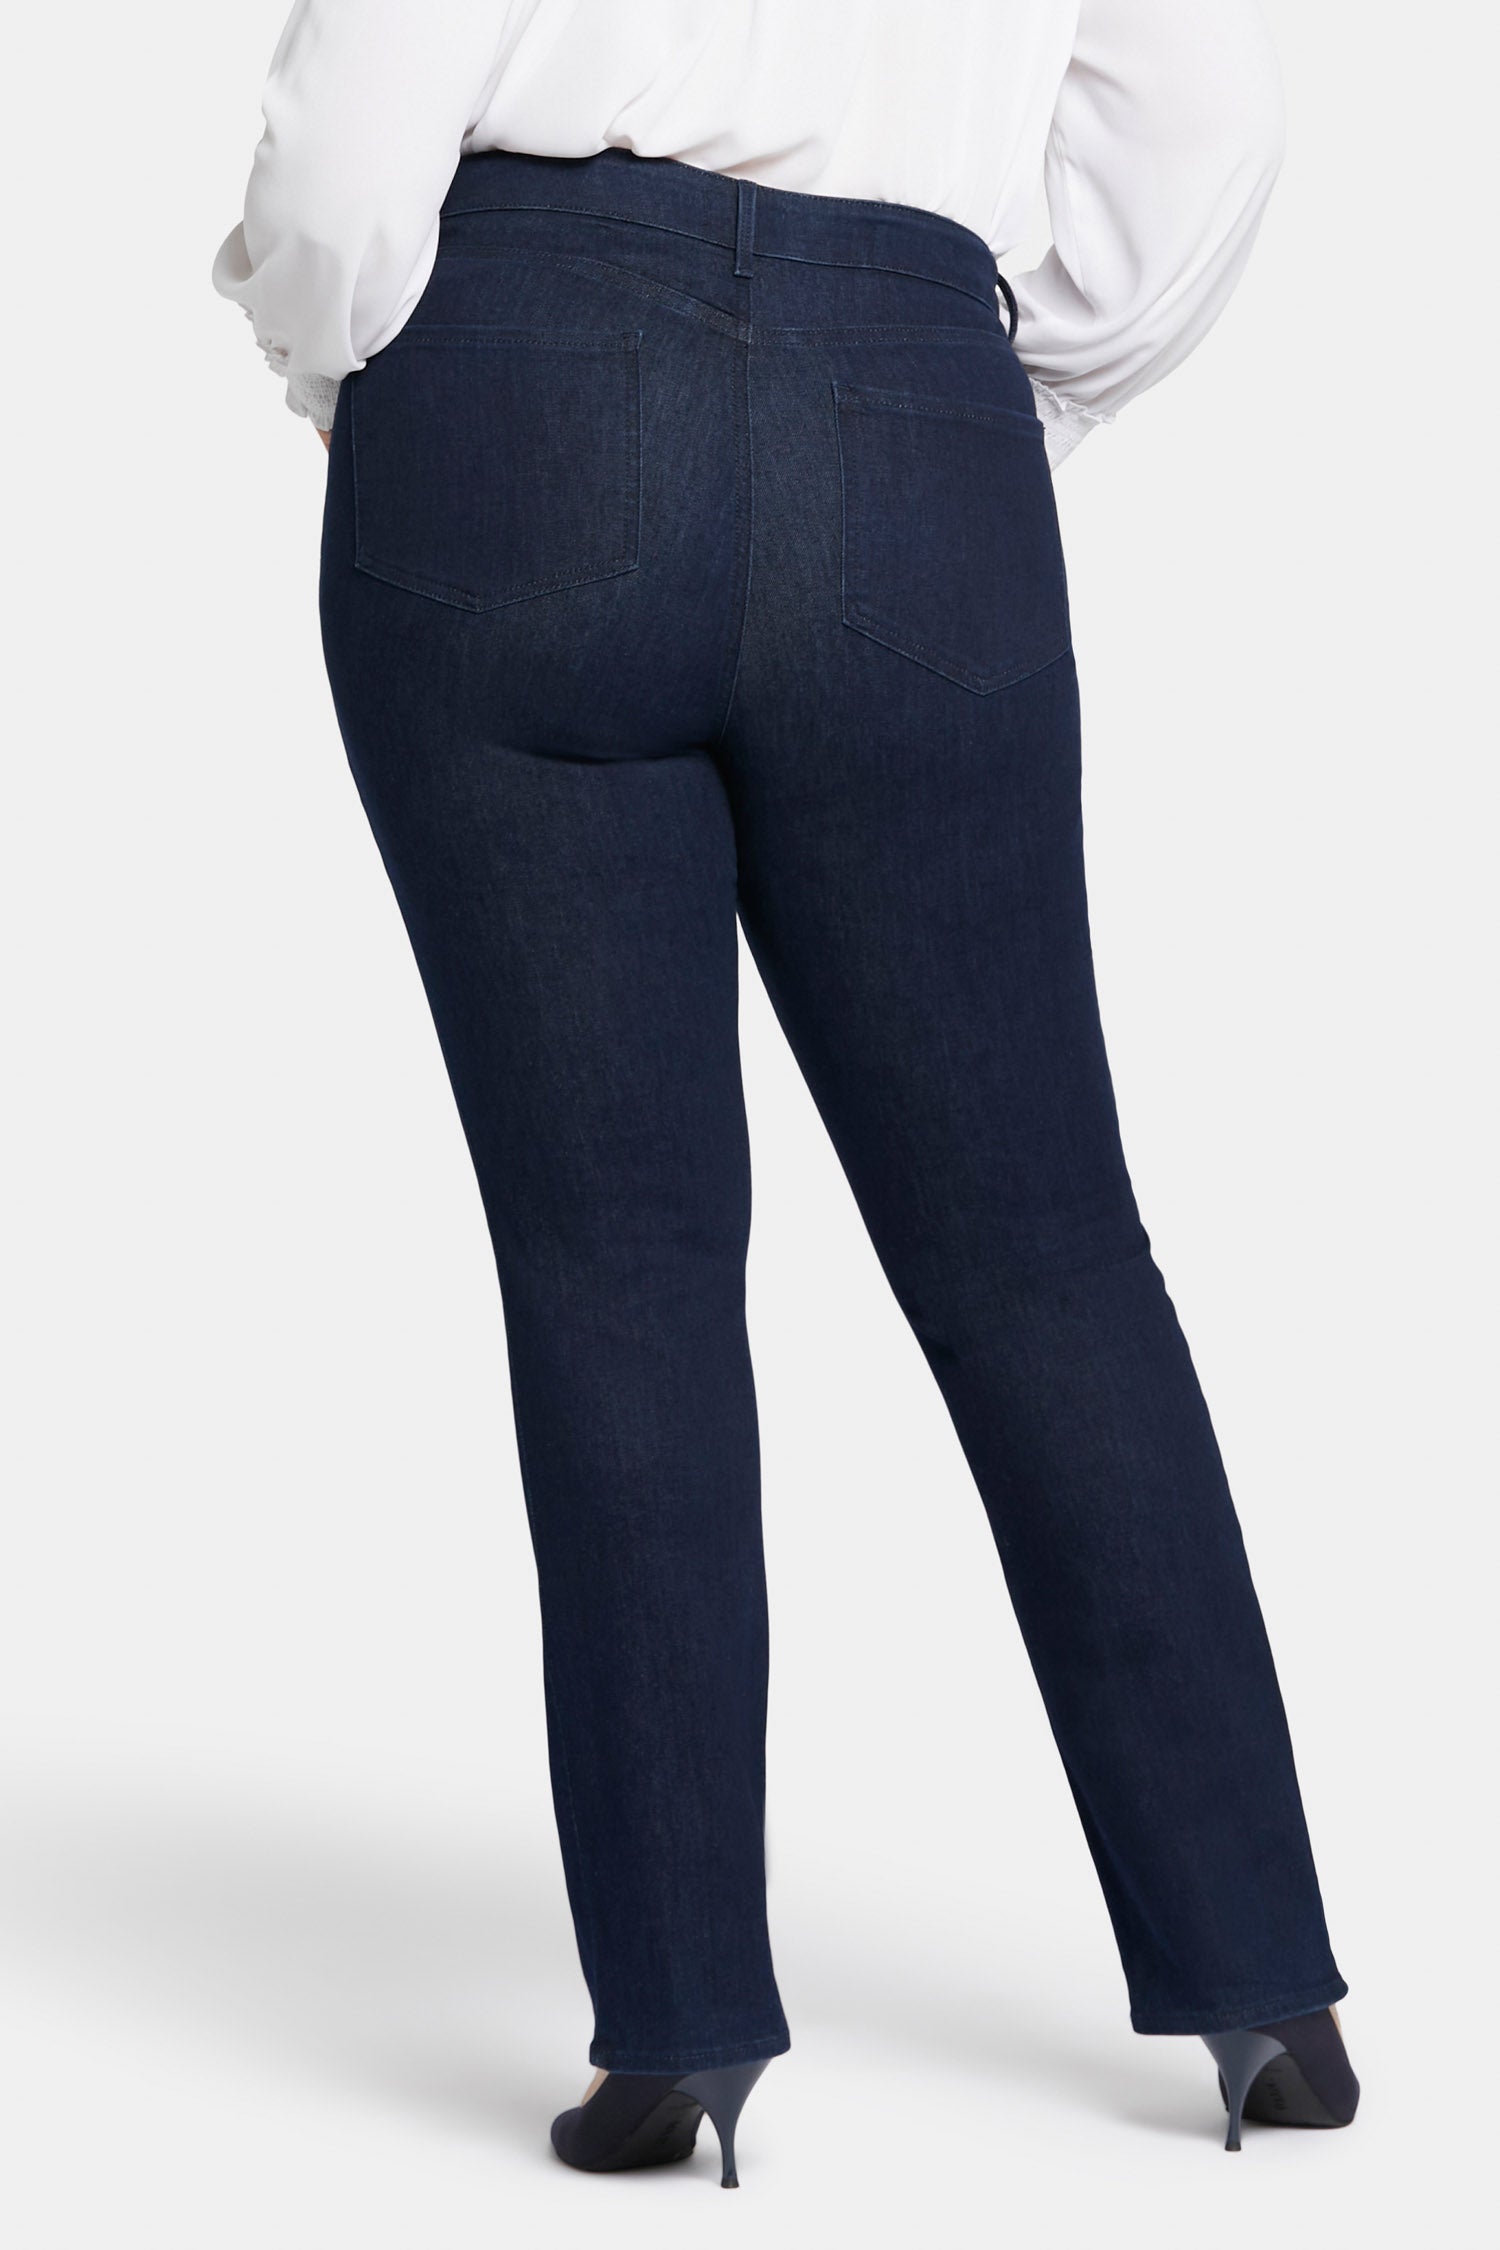 Marilyn Straight Ankle Jeans In Petite Plus Size In Cool Embrace® Denim  With High Rise And Released Hems - Brightside Blue